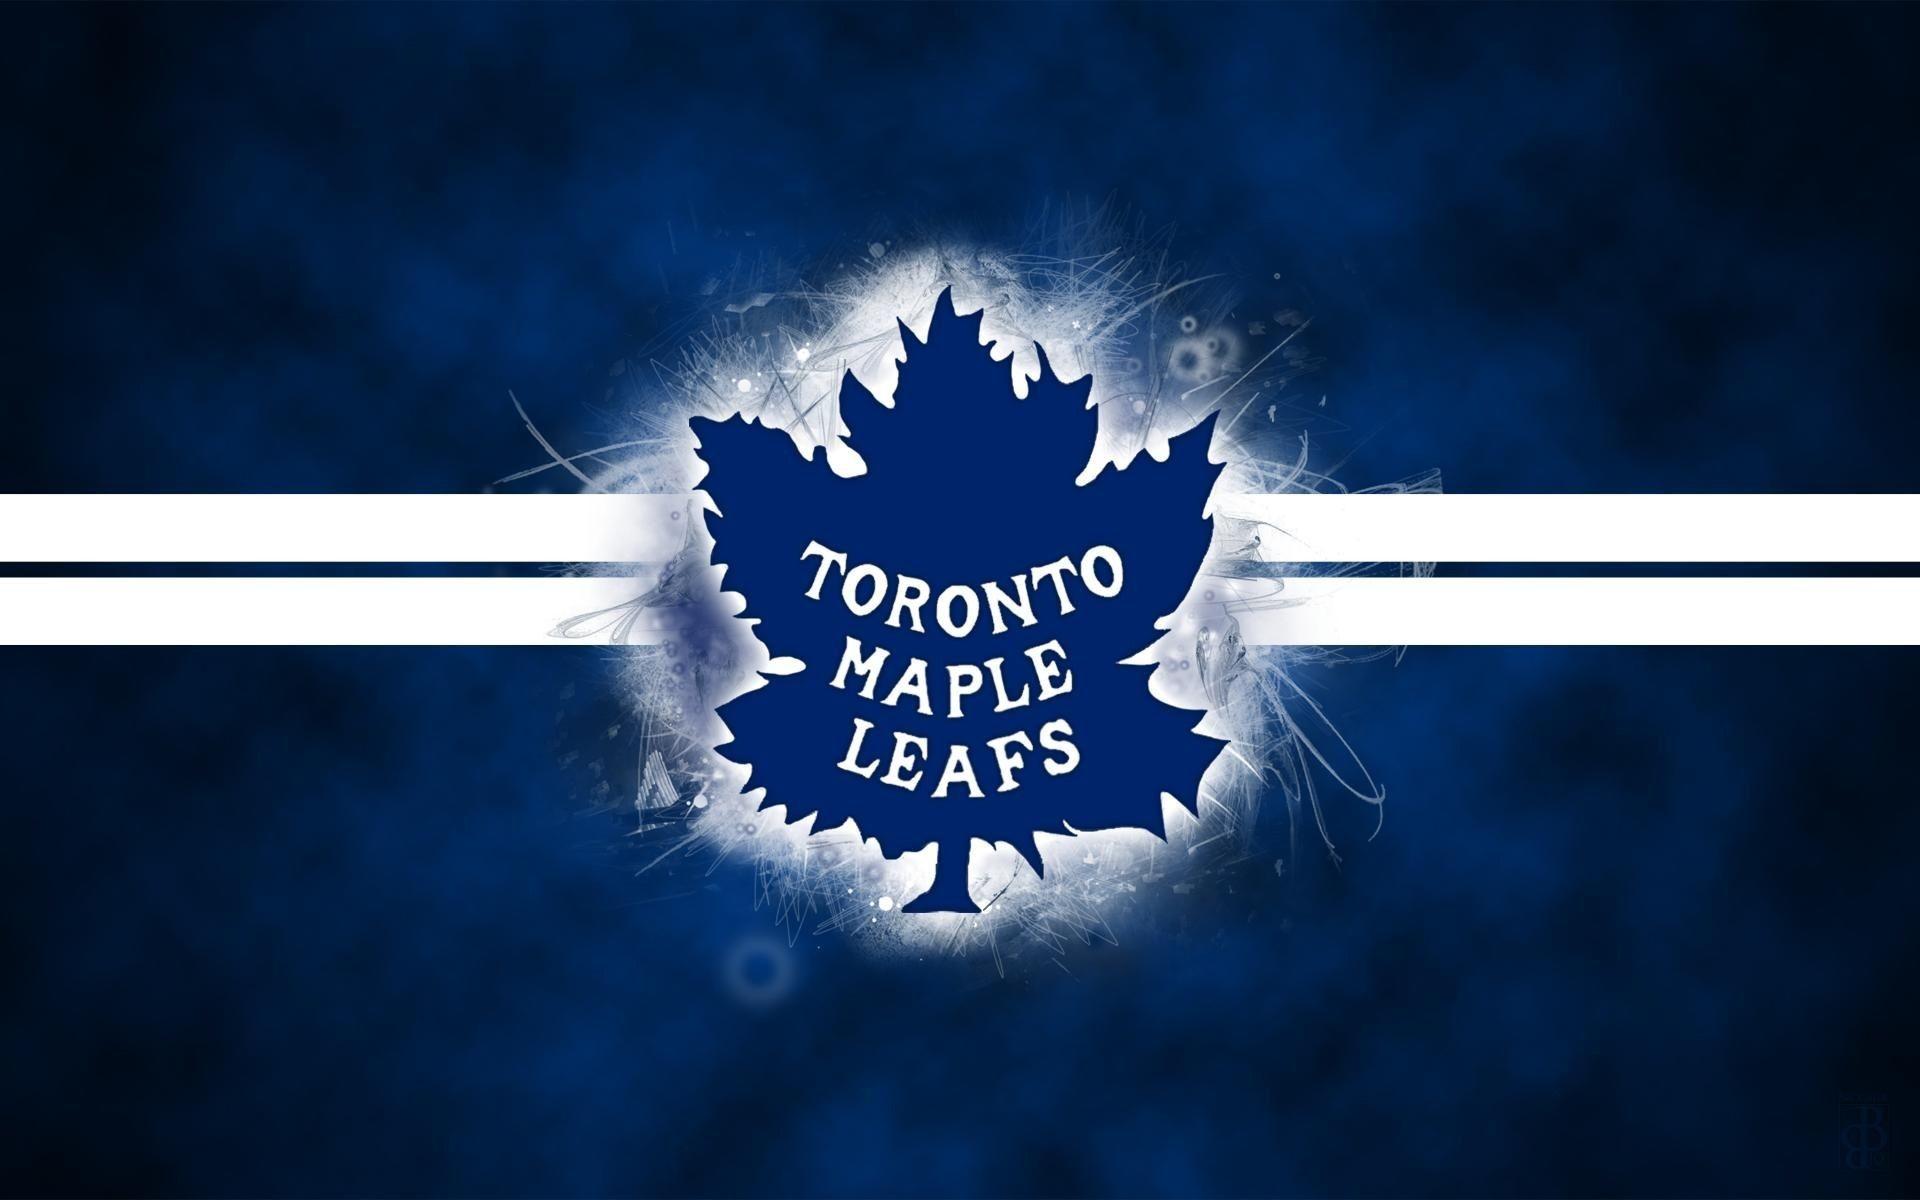 Toronto Maple Leafs Wallpaper background picture